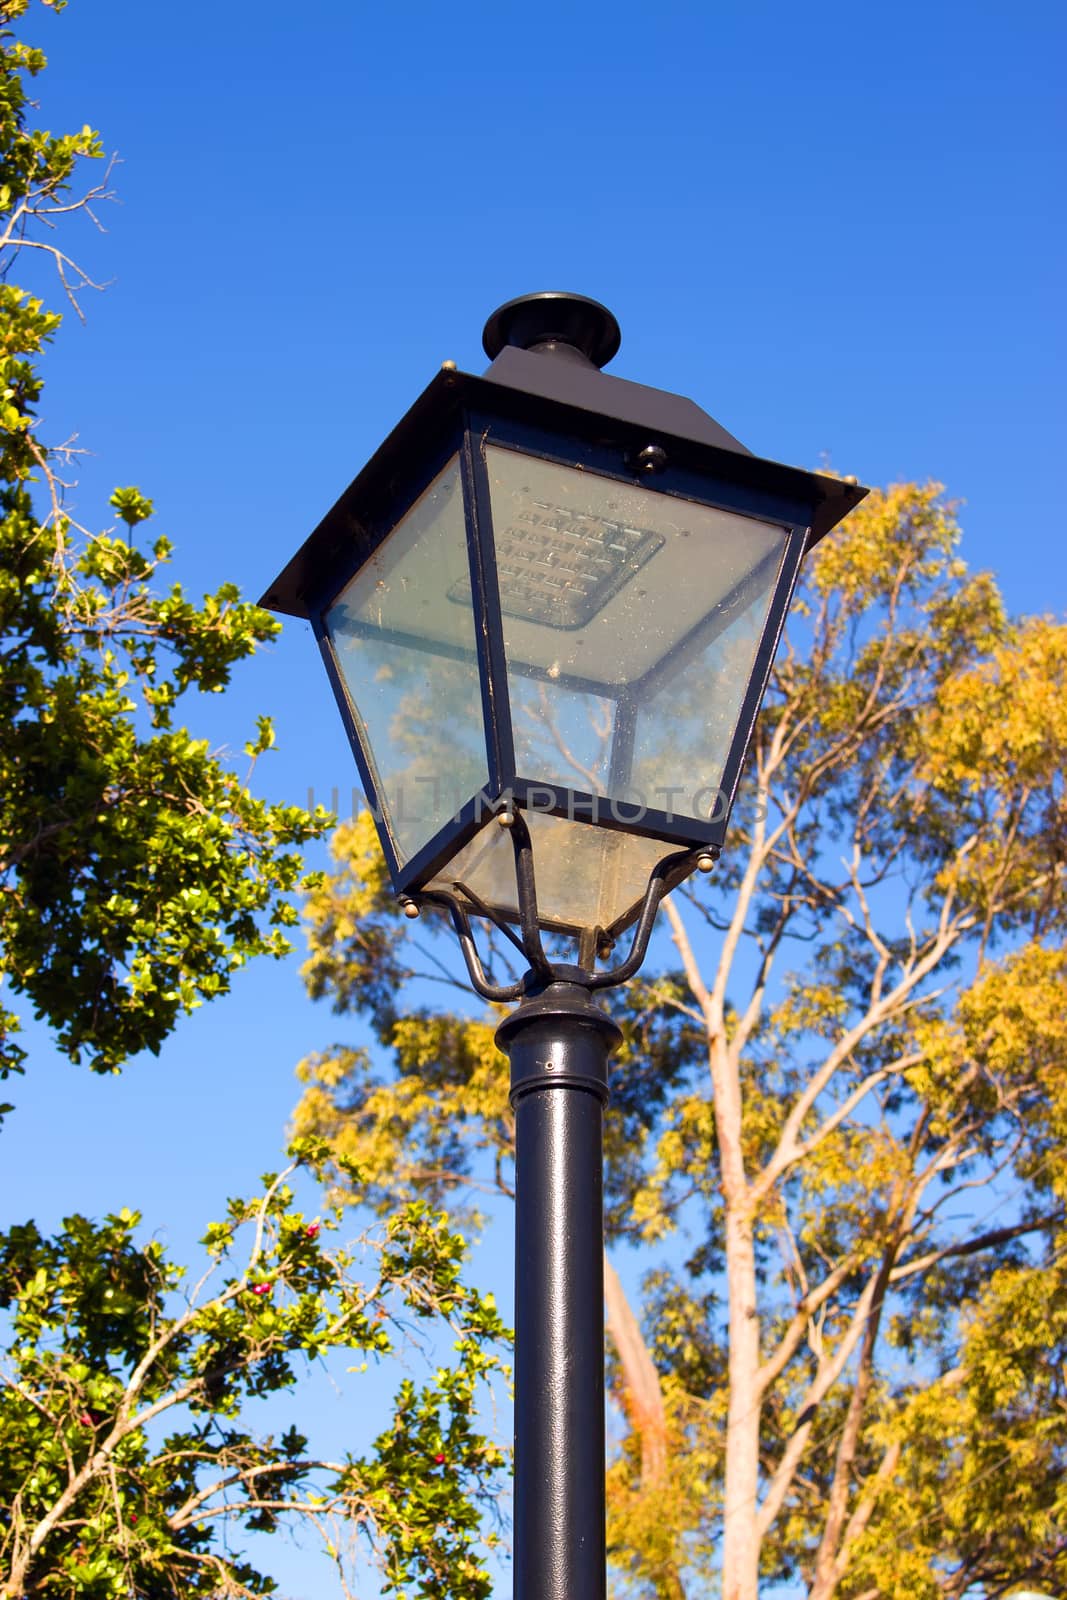 Vertical shot of street light against sky and trees in background